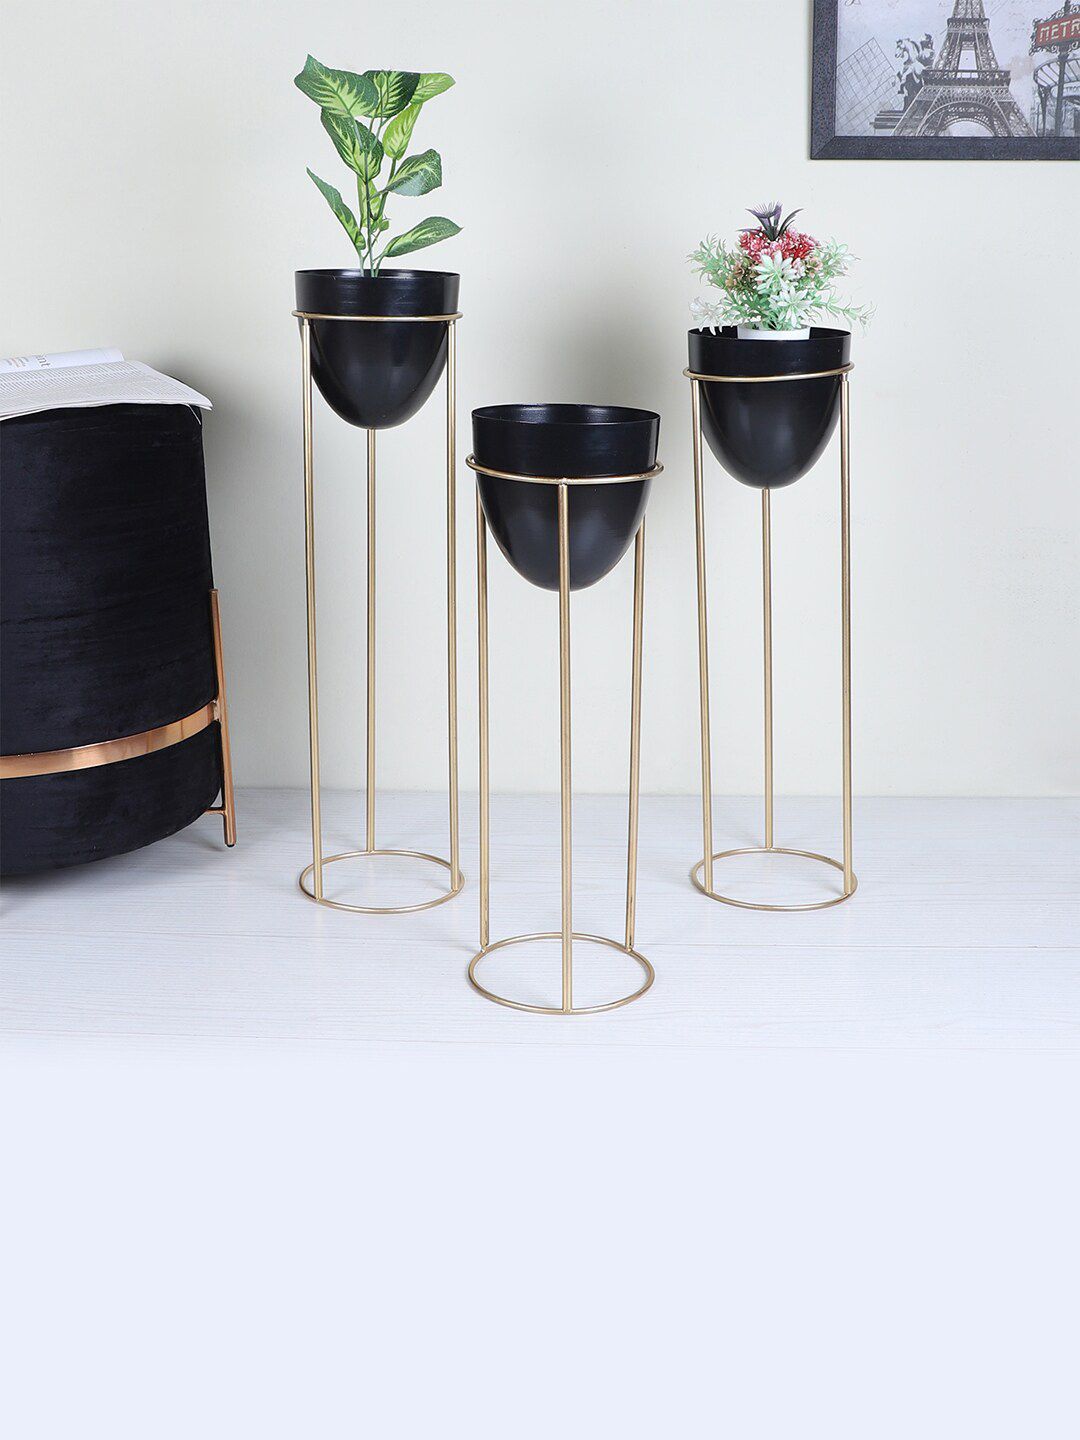 Amaya Decors Pack Of 3 Gold-Toned & Black Solid Planters With Stand Price in India